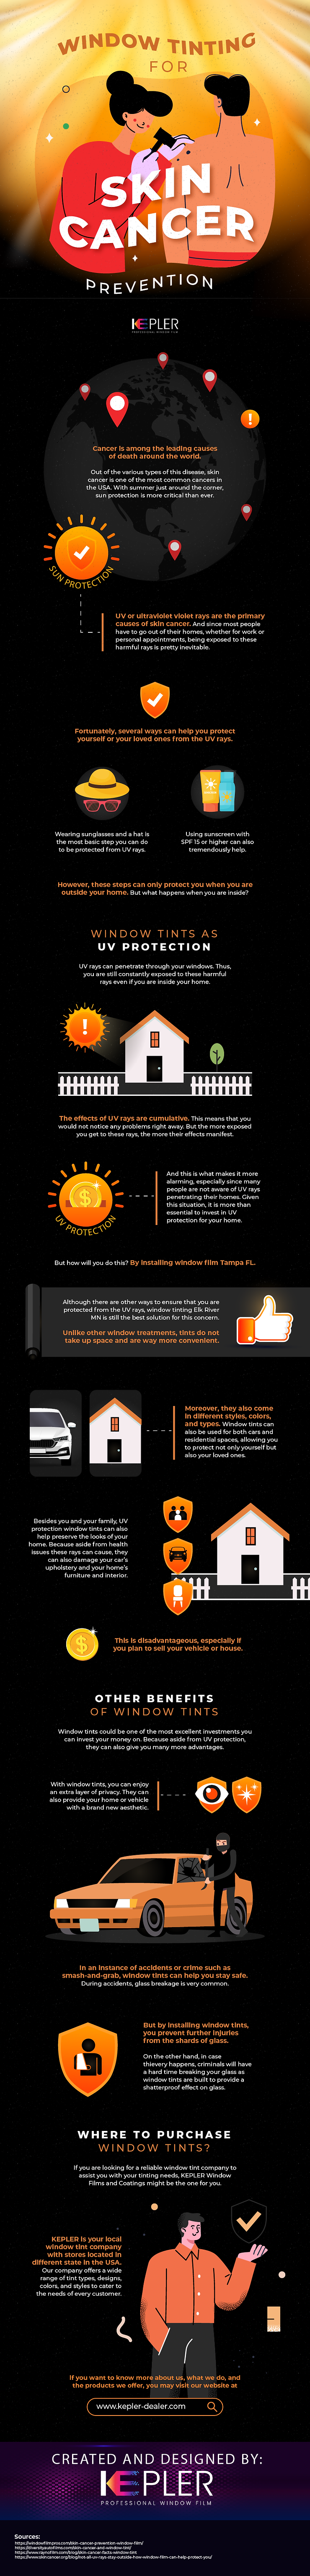 Window Tinting for Skin Cancer Prevention - Infographic